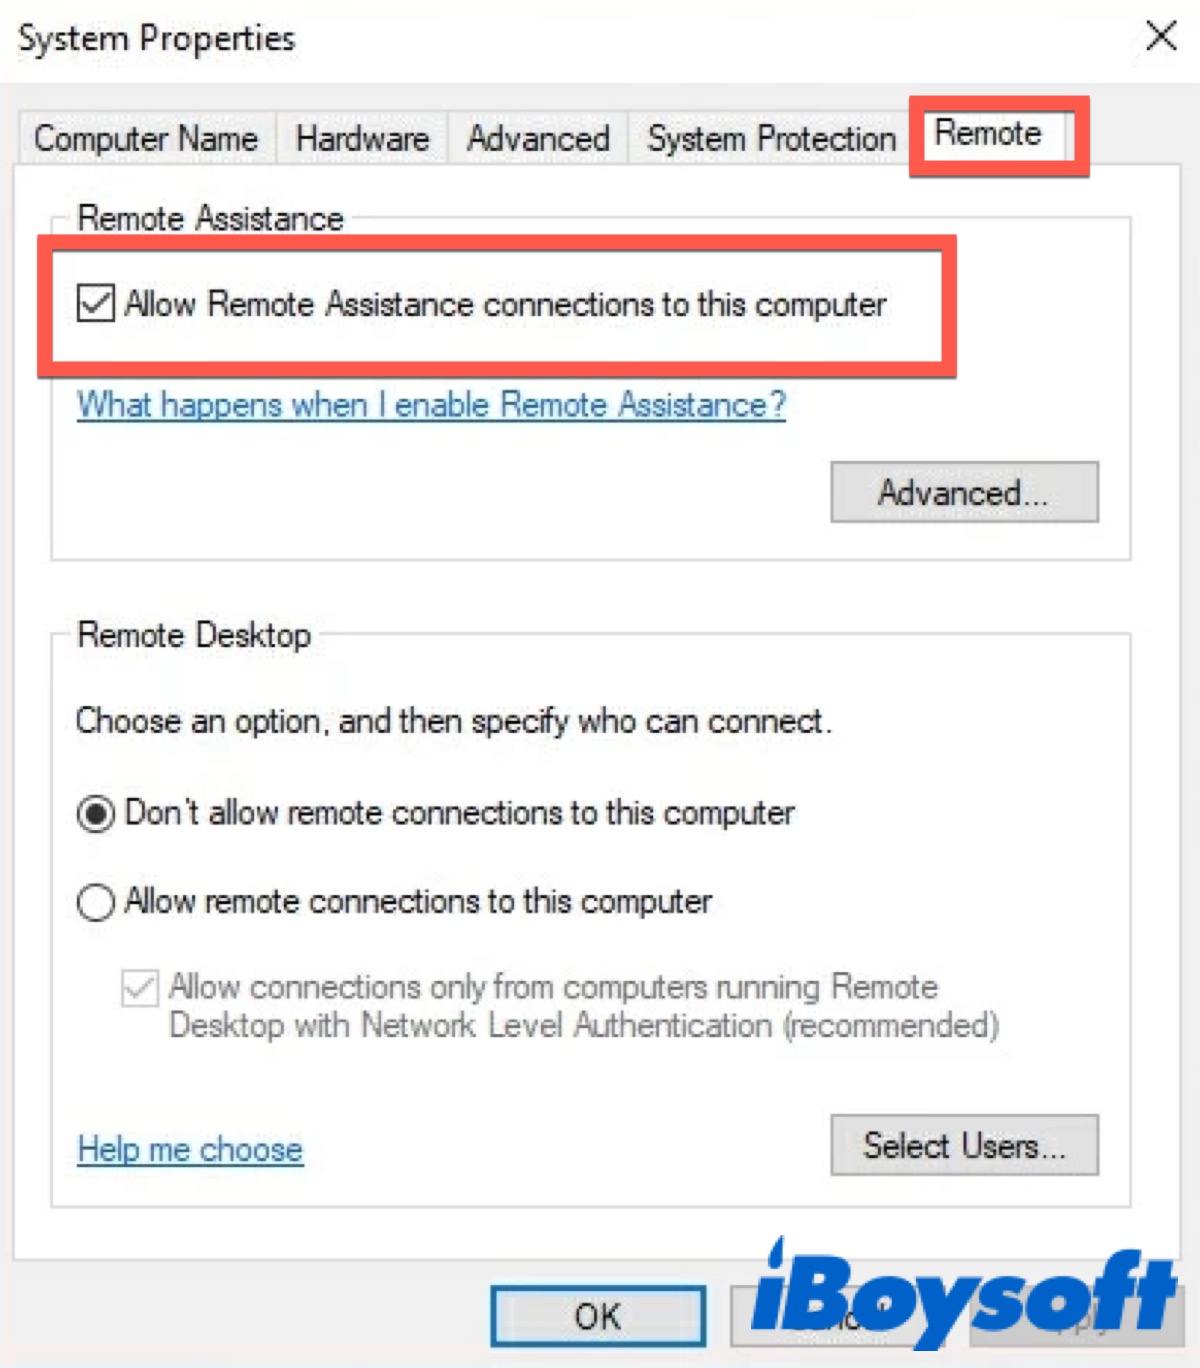 Make sure Remote Desktop is enabled on your PC